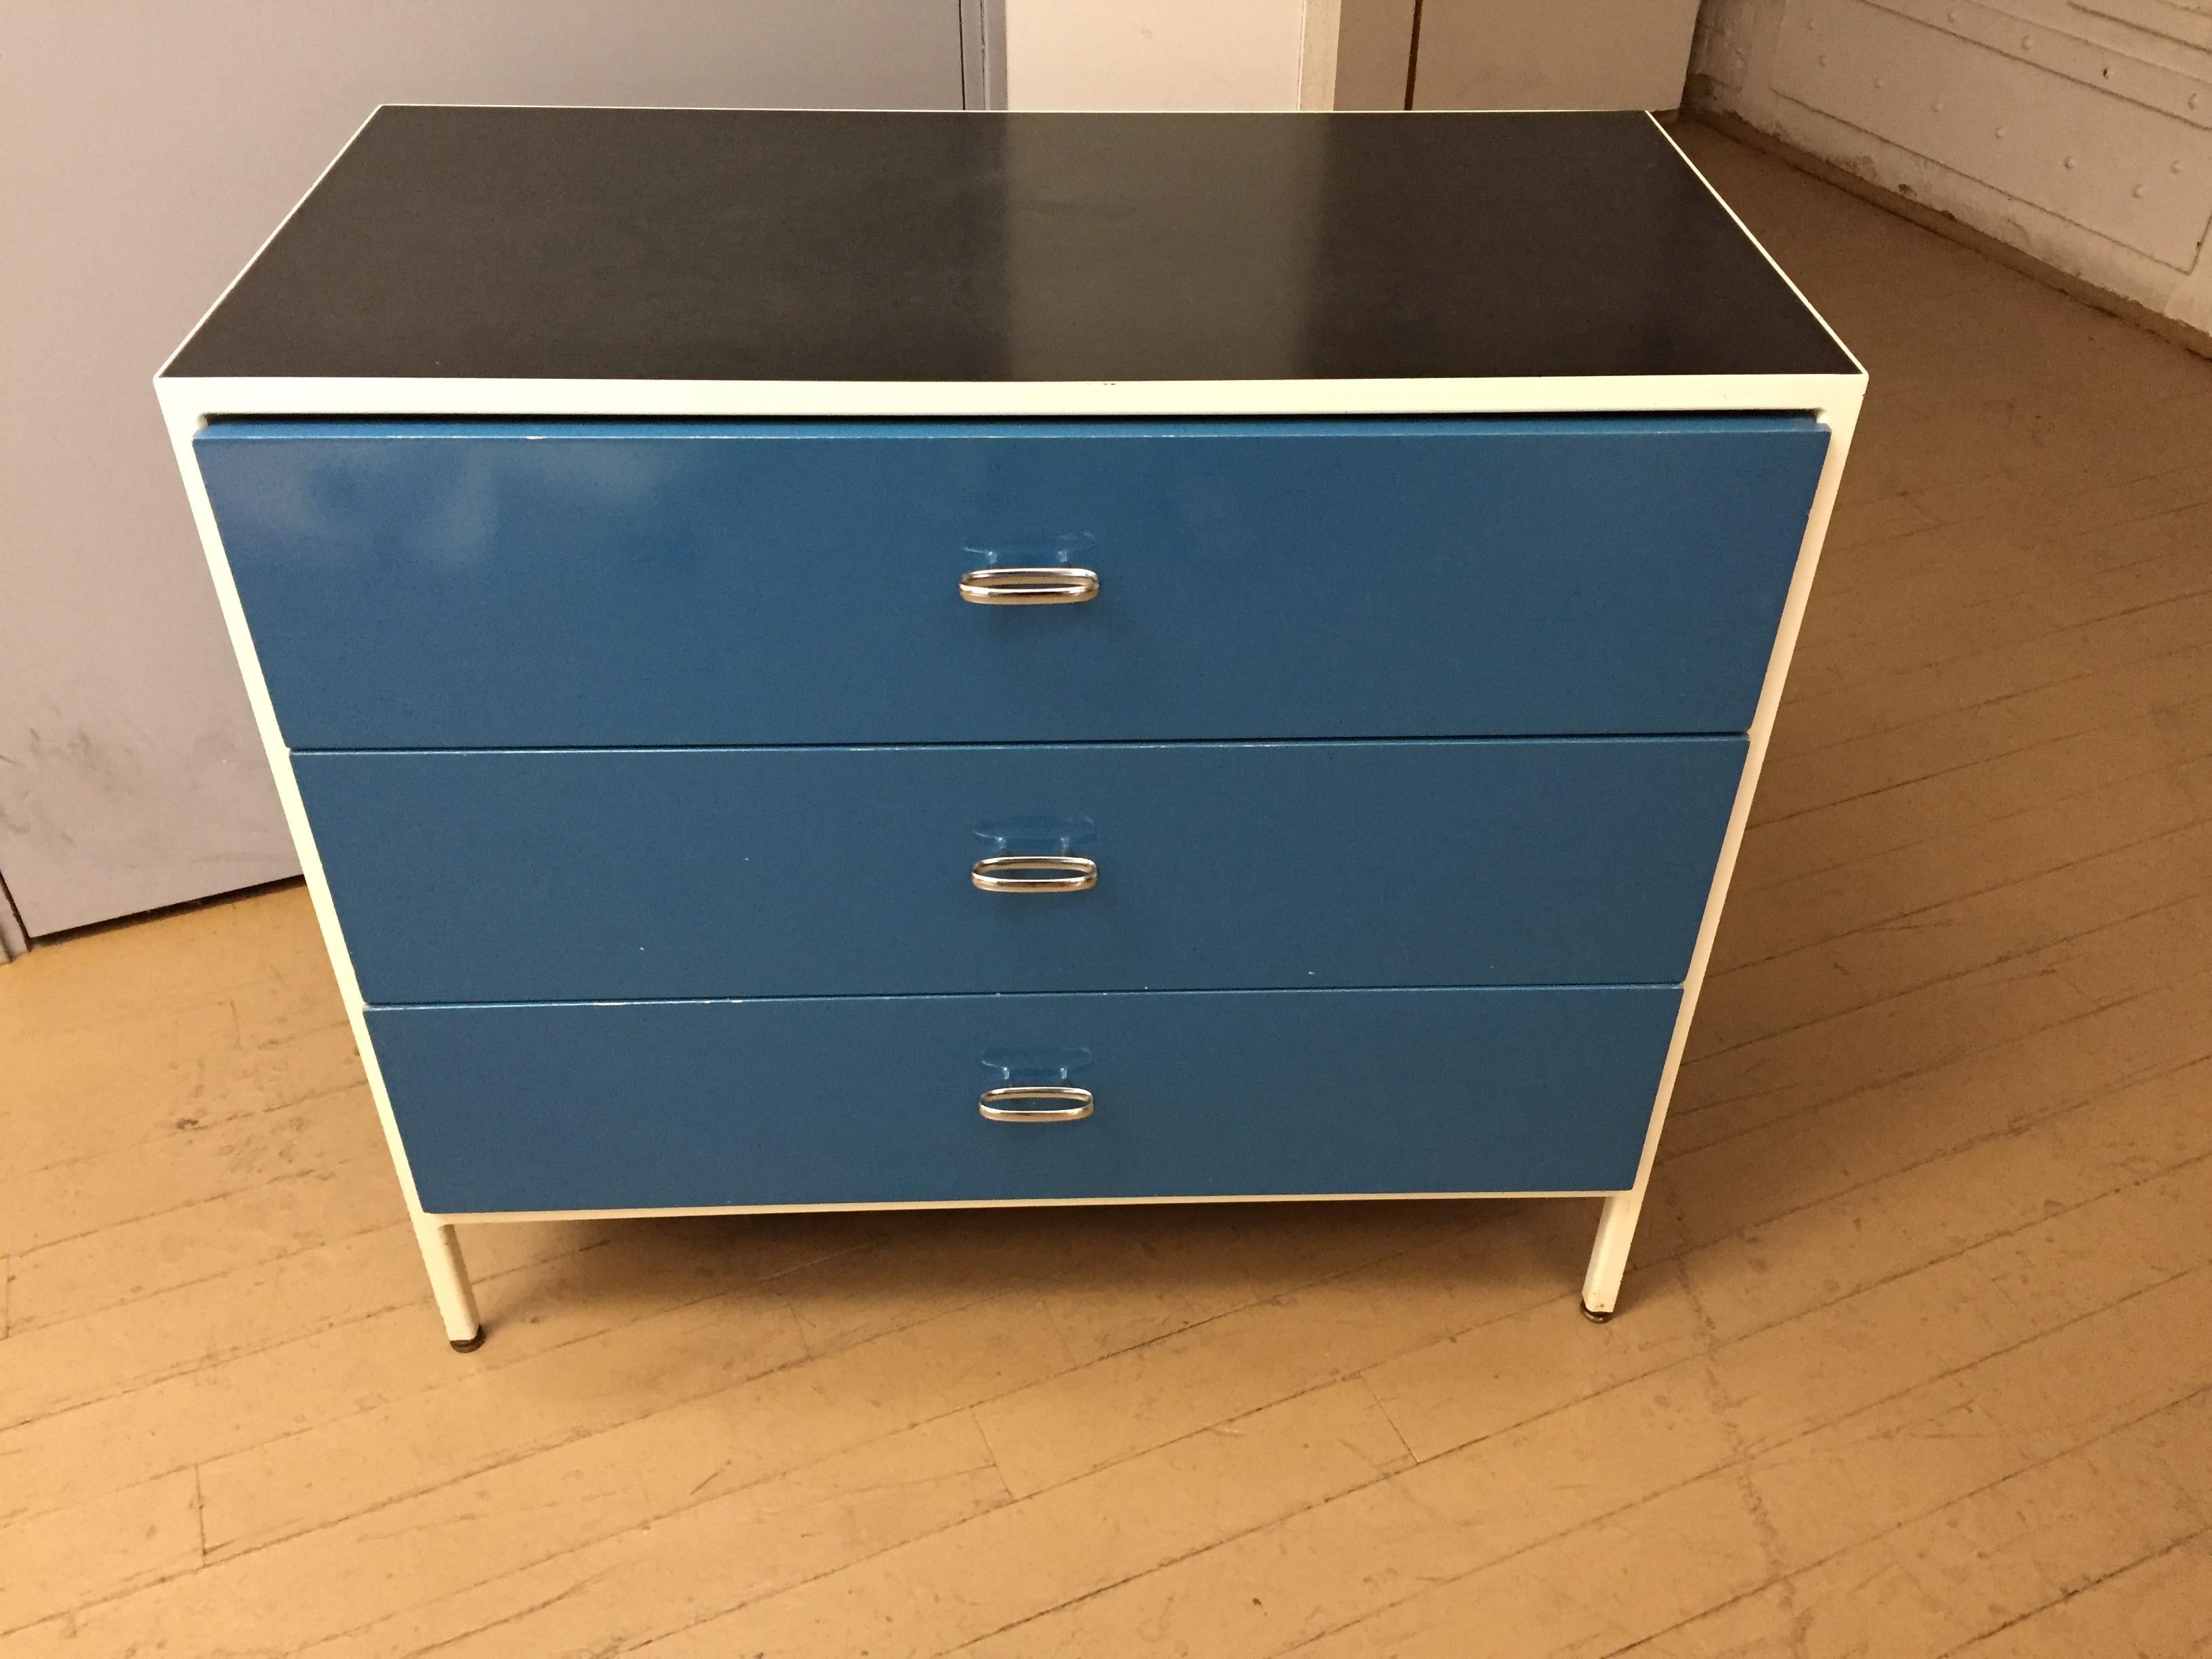 Mid-Century Modern George Nelson for Herman Miller Mid-Century Modern iconic pair of three-drawer chests from the steel frame series .
Created by George Nelson for Herman Miller with white enameled metal frames, black laminate tops, blue lacquered